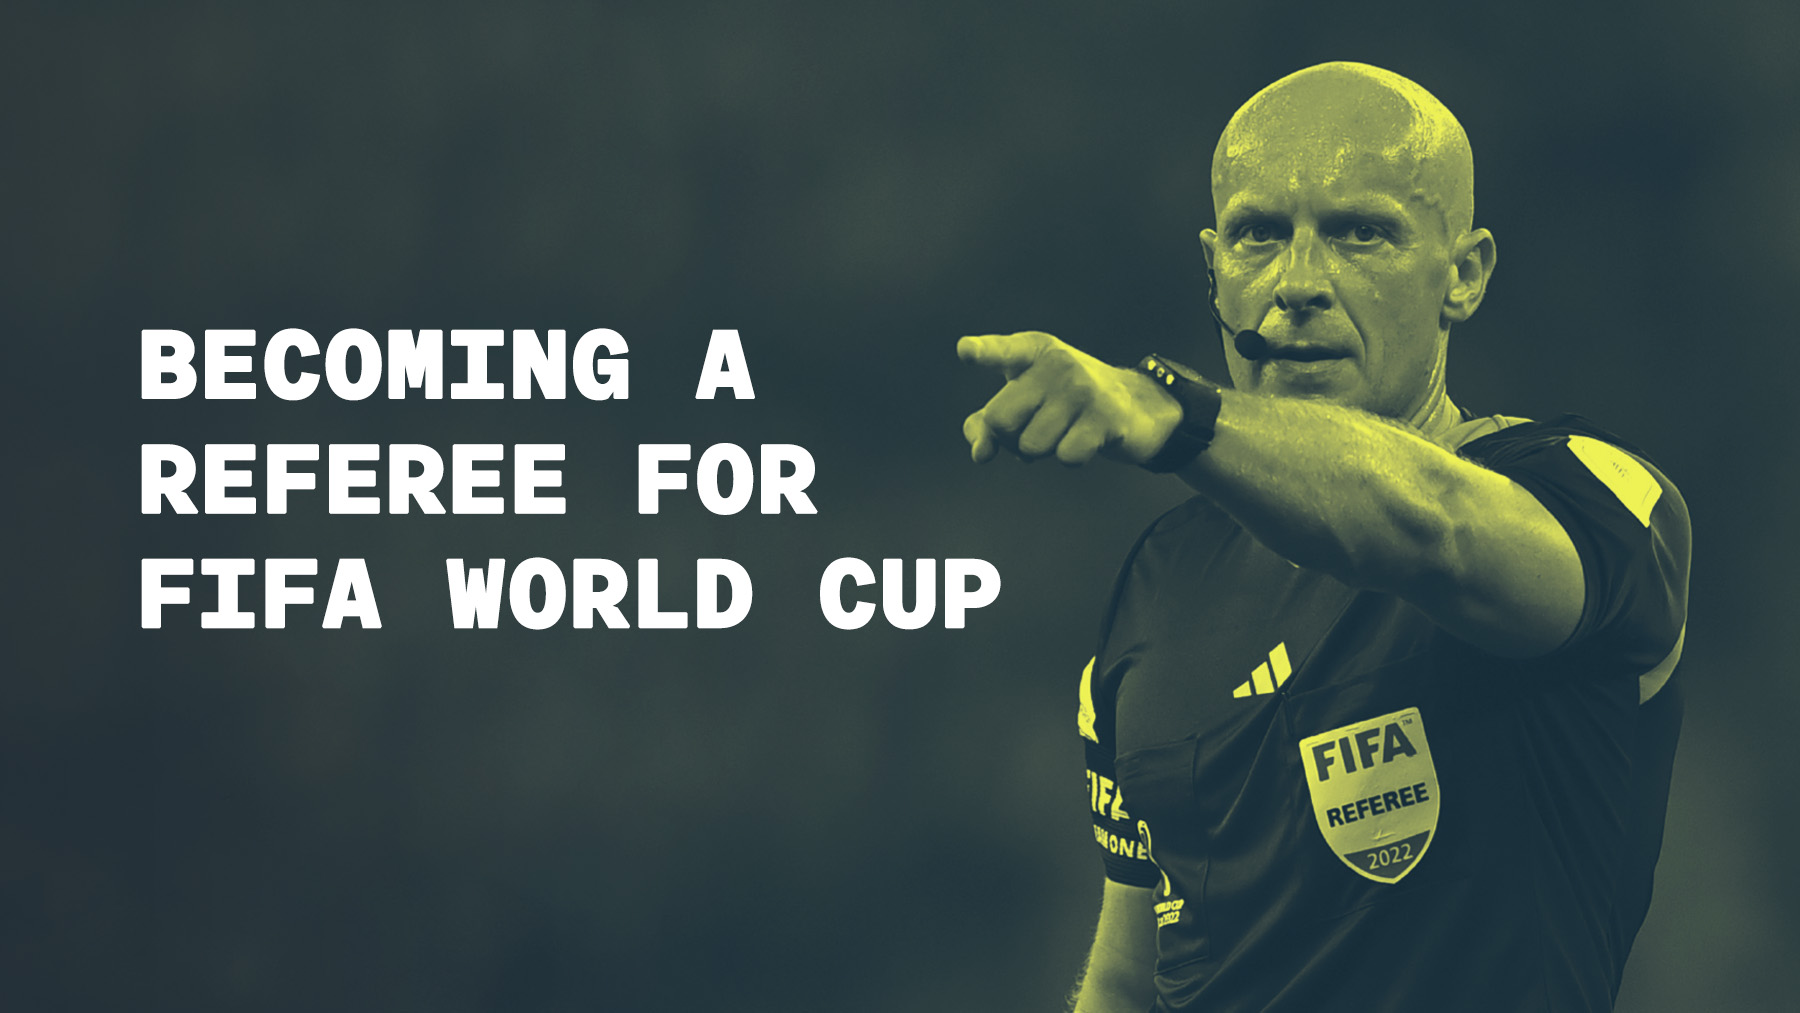 Qualify for World Cup as a Referee